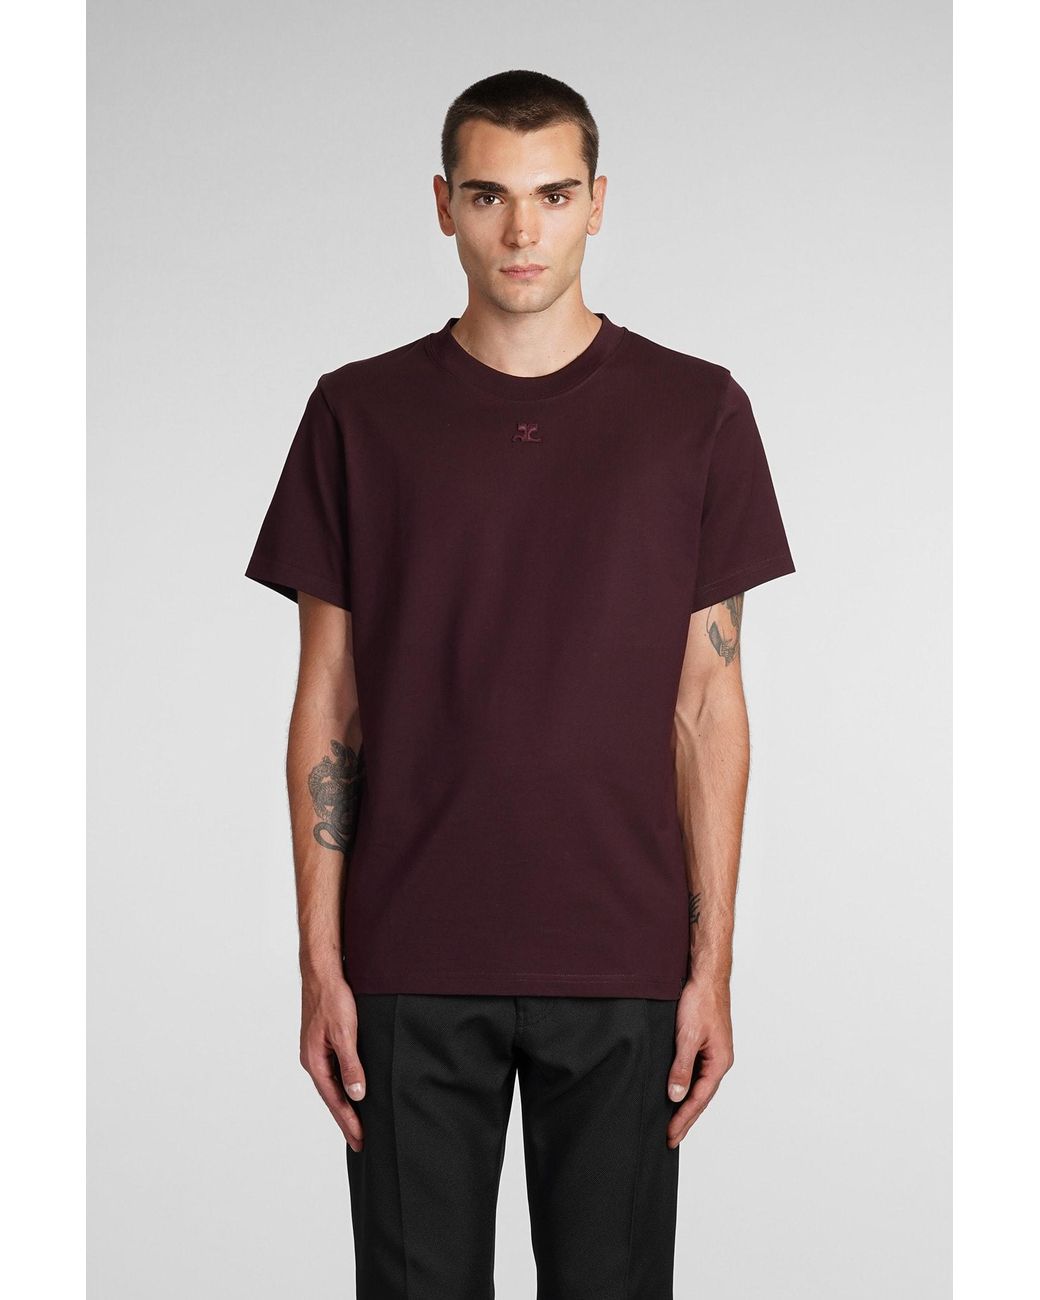 Courreges T-shirt In Bordeaux Cotton in Red for Men | Lyst